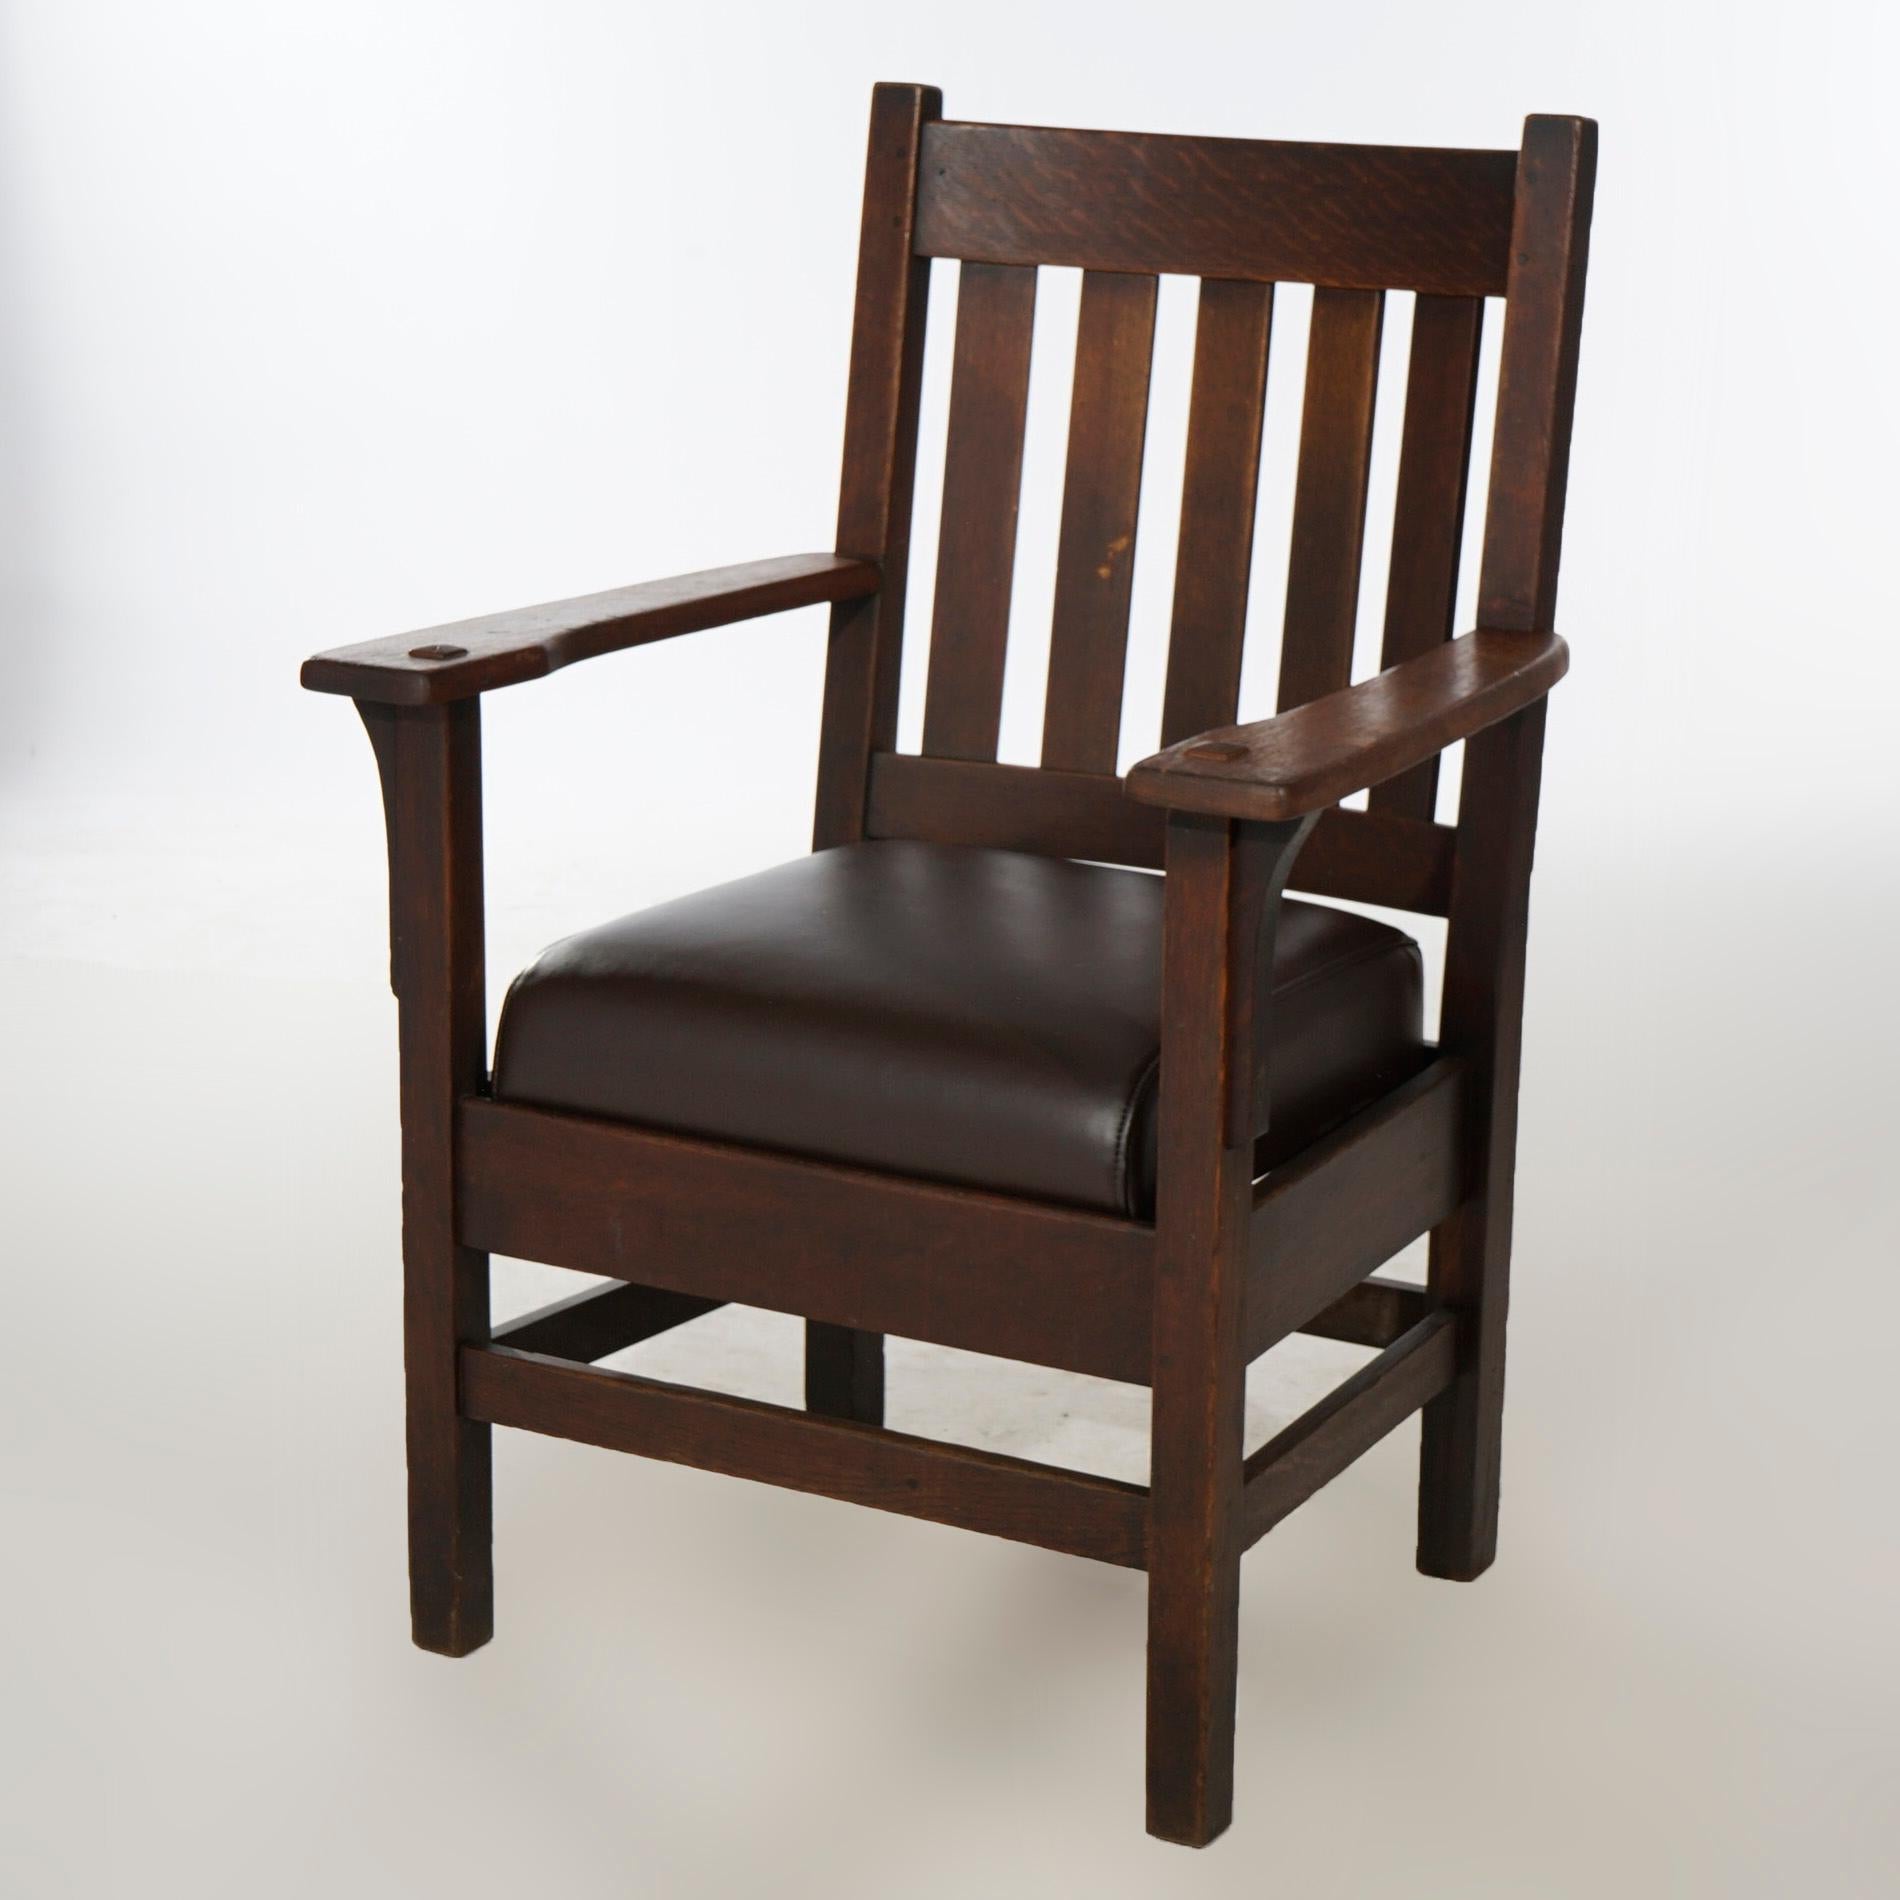 An antique Arts and Crafts Mission arm chair offers quarter sawn oak construction with slat back and upholstered seat, c1910.

Measures- 39.25''H x 27.5''W x 25''D.

*Ask about DISCOUNTED DELIVERY rates within 1,500 miles of NY*